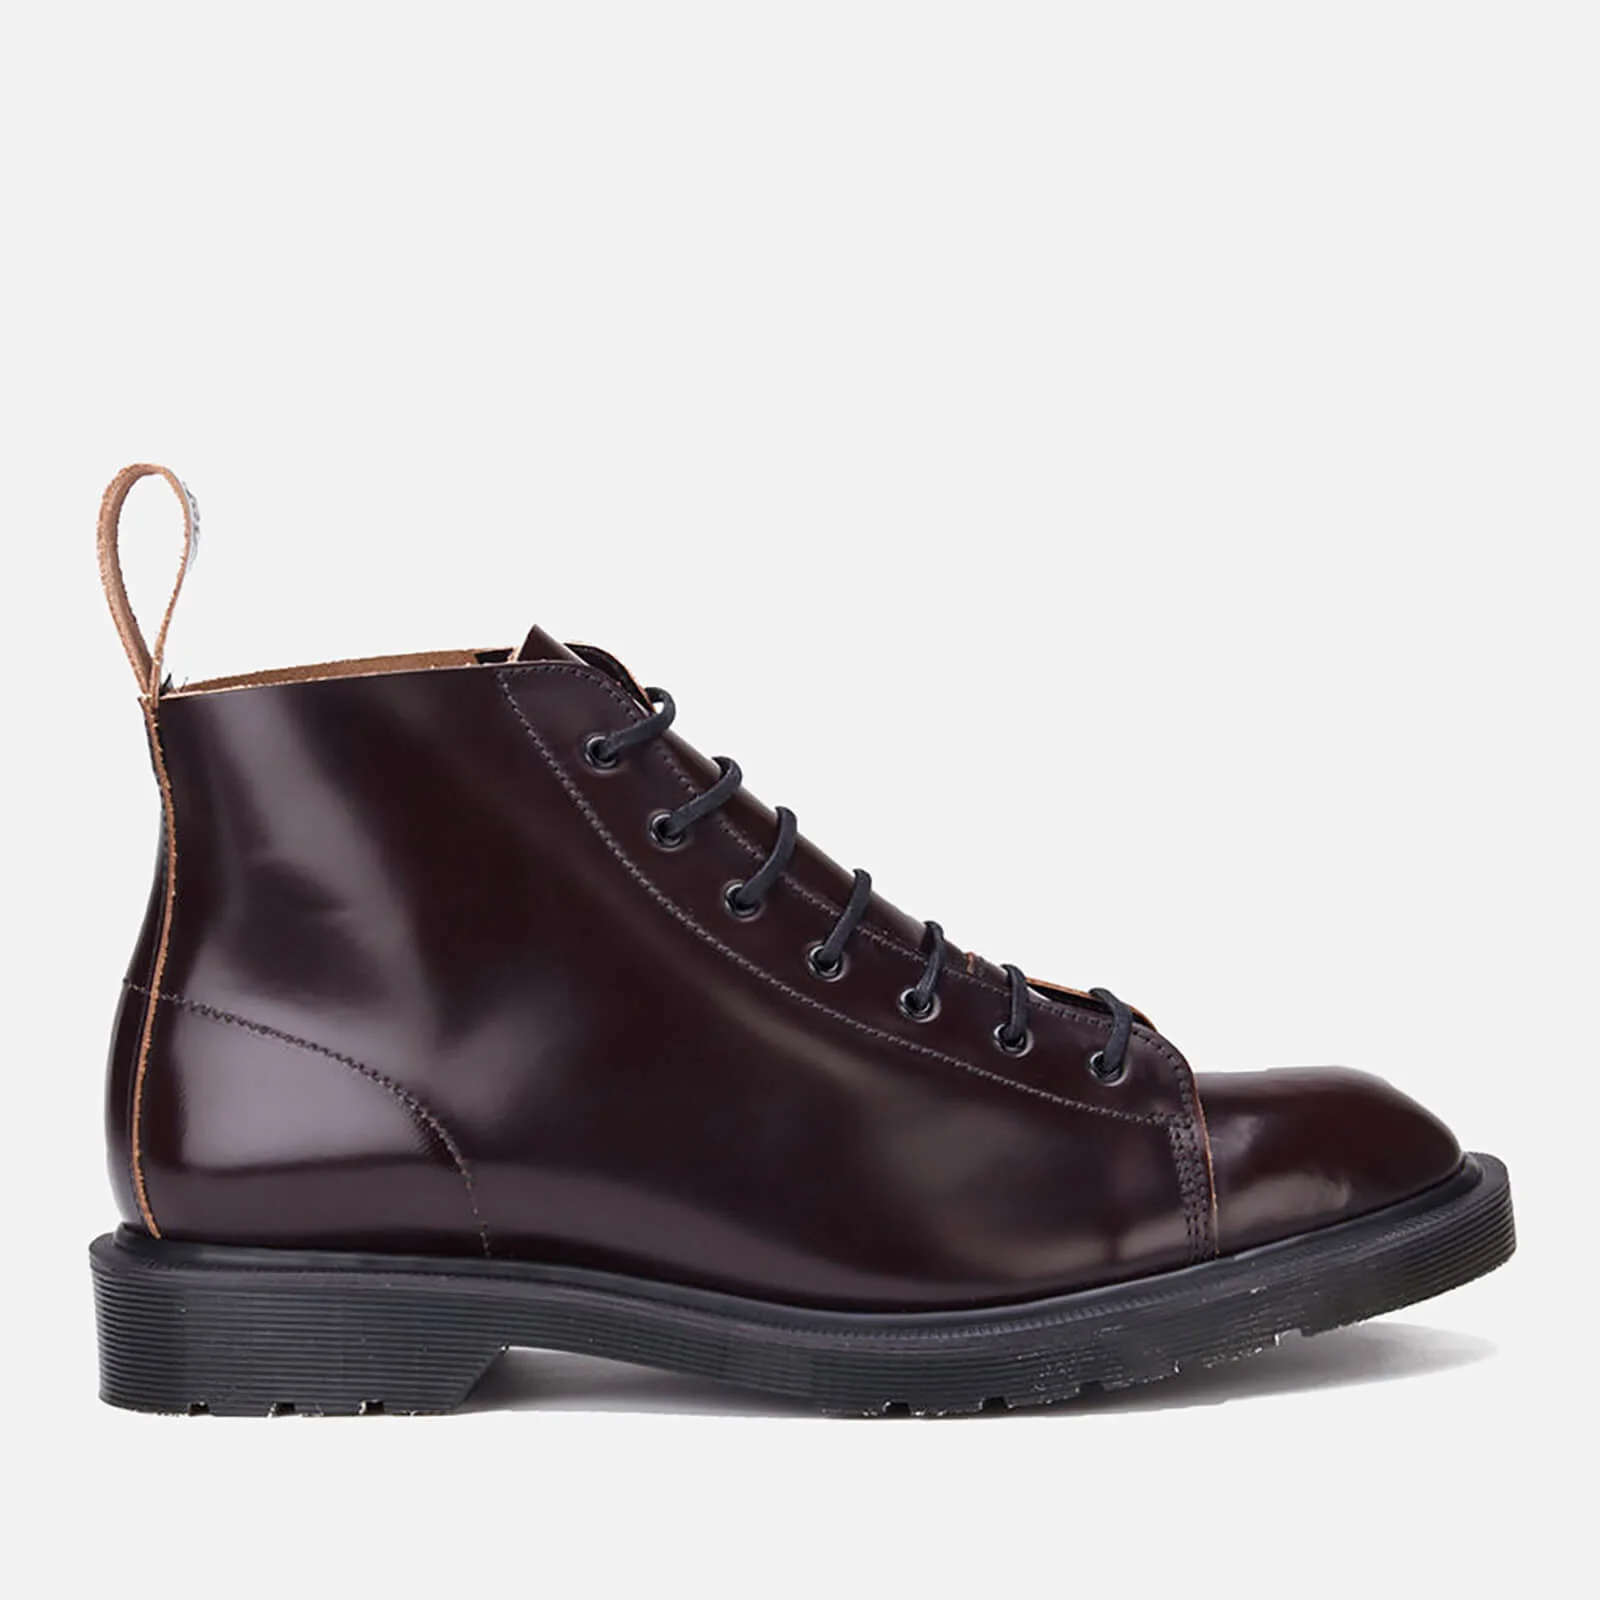 Dr. Martens Men's 'Made in England' Core Les Lace To Toe Leather Boots - Merlot Boanil Brush Image 1